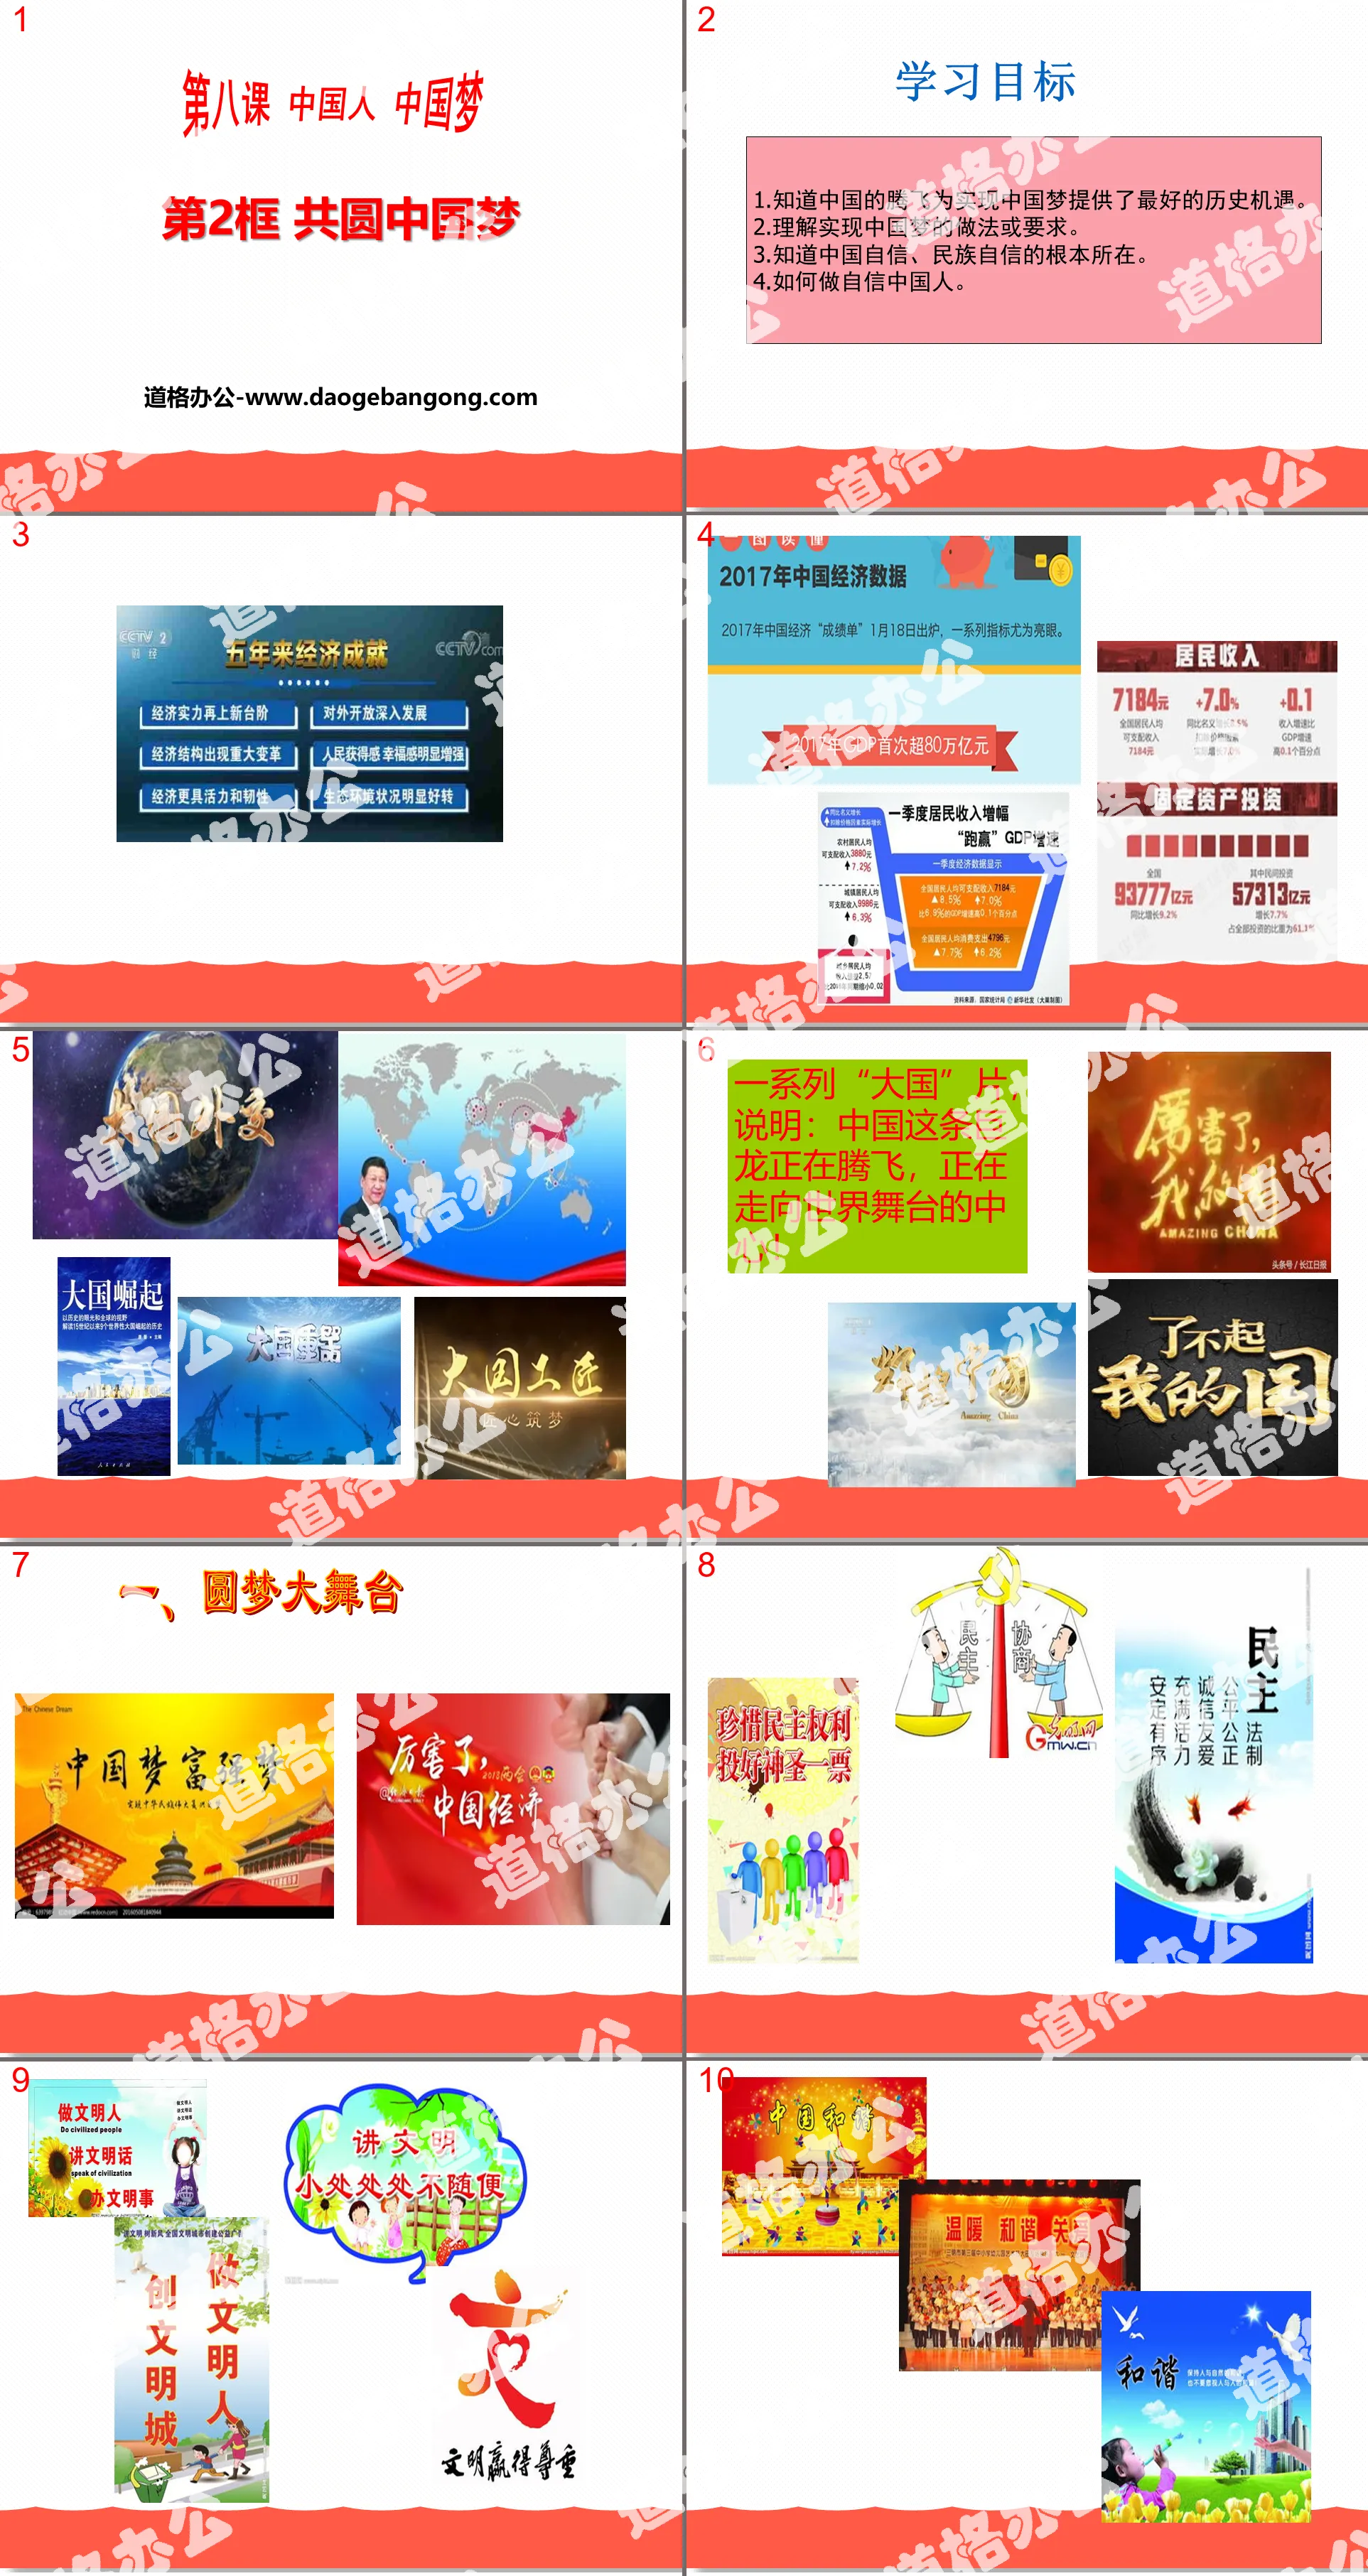 "Together Realize the Chinese Dream" Chinese People's Chinese Dream PPT